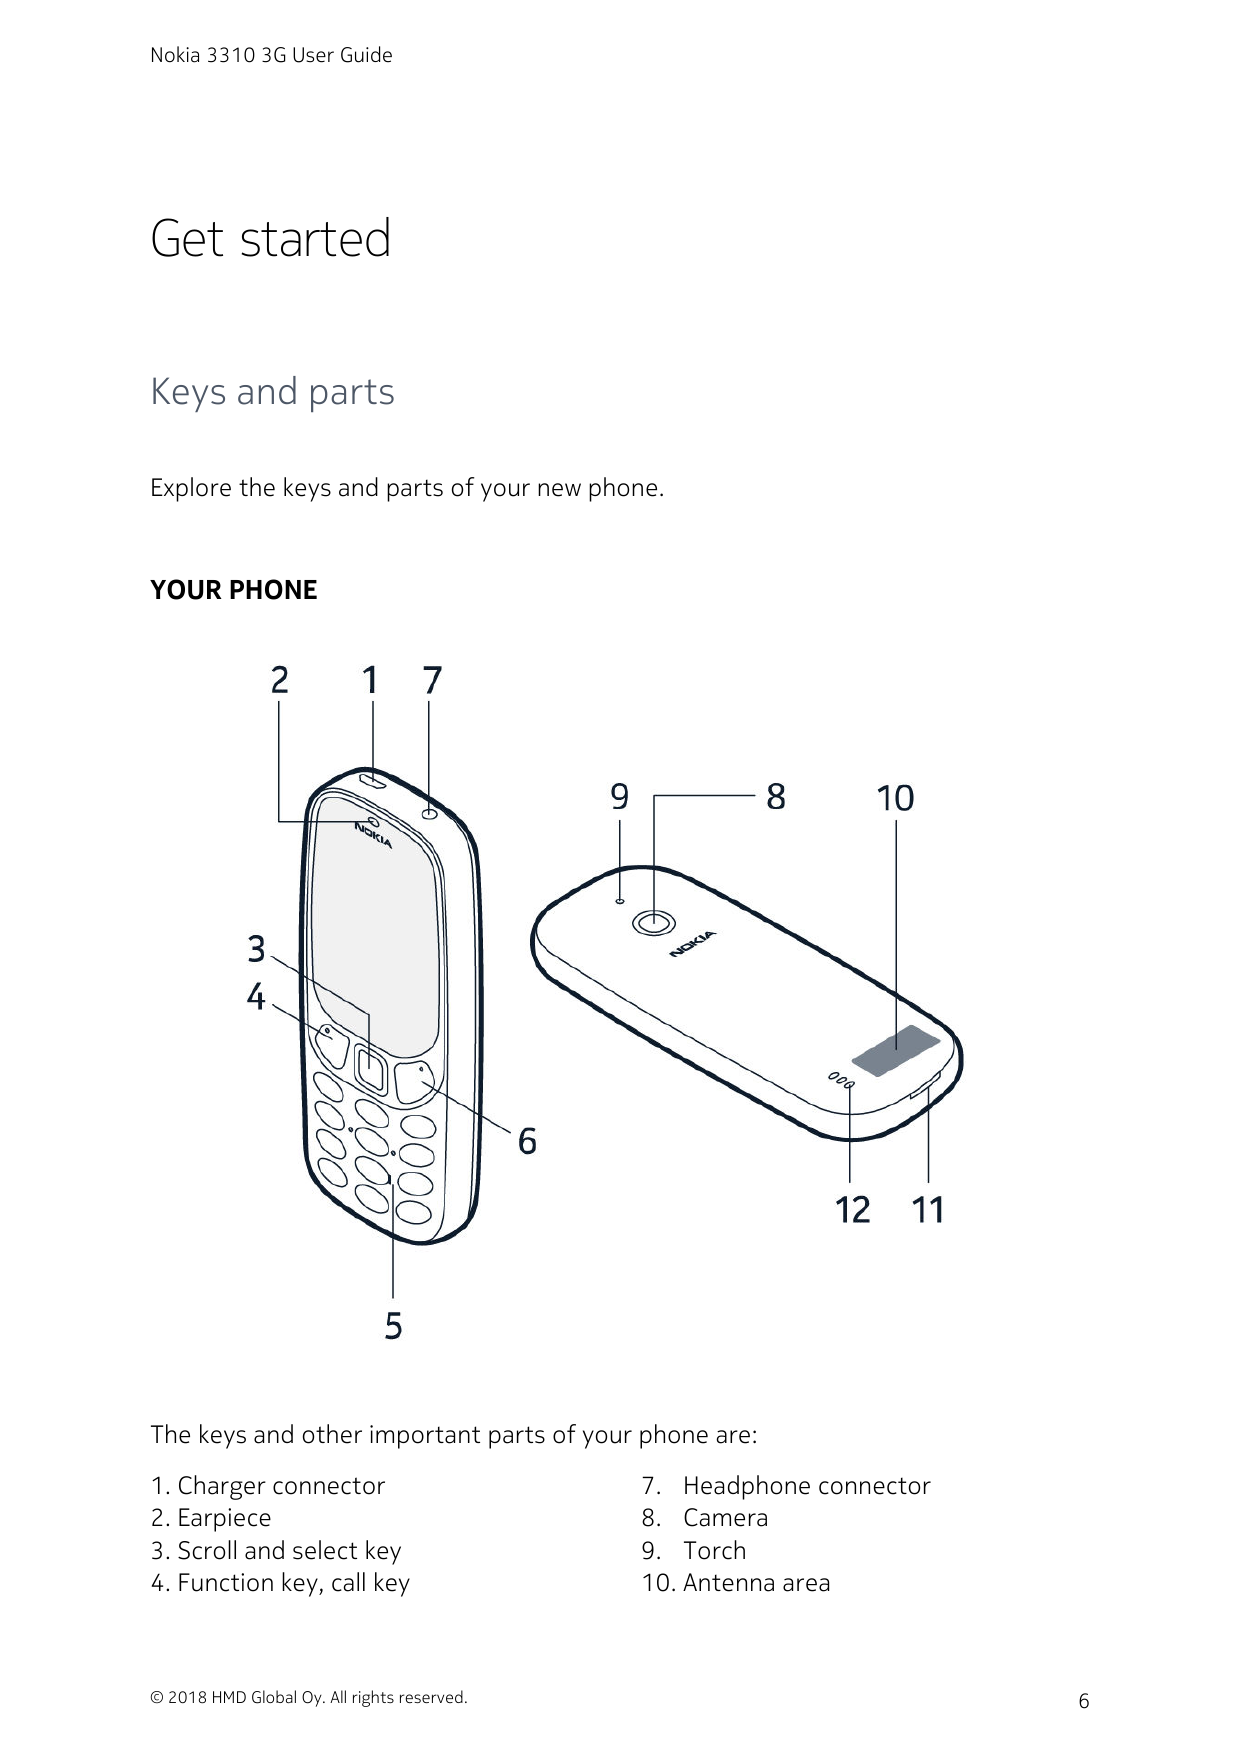 Nokia 3310 3G User GuideGet startedKeys and partsExplore the keys and parts of your new phone.YOUR PHONEThe keys and other impor